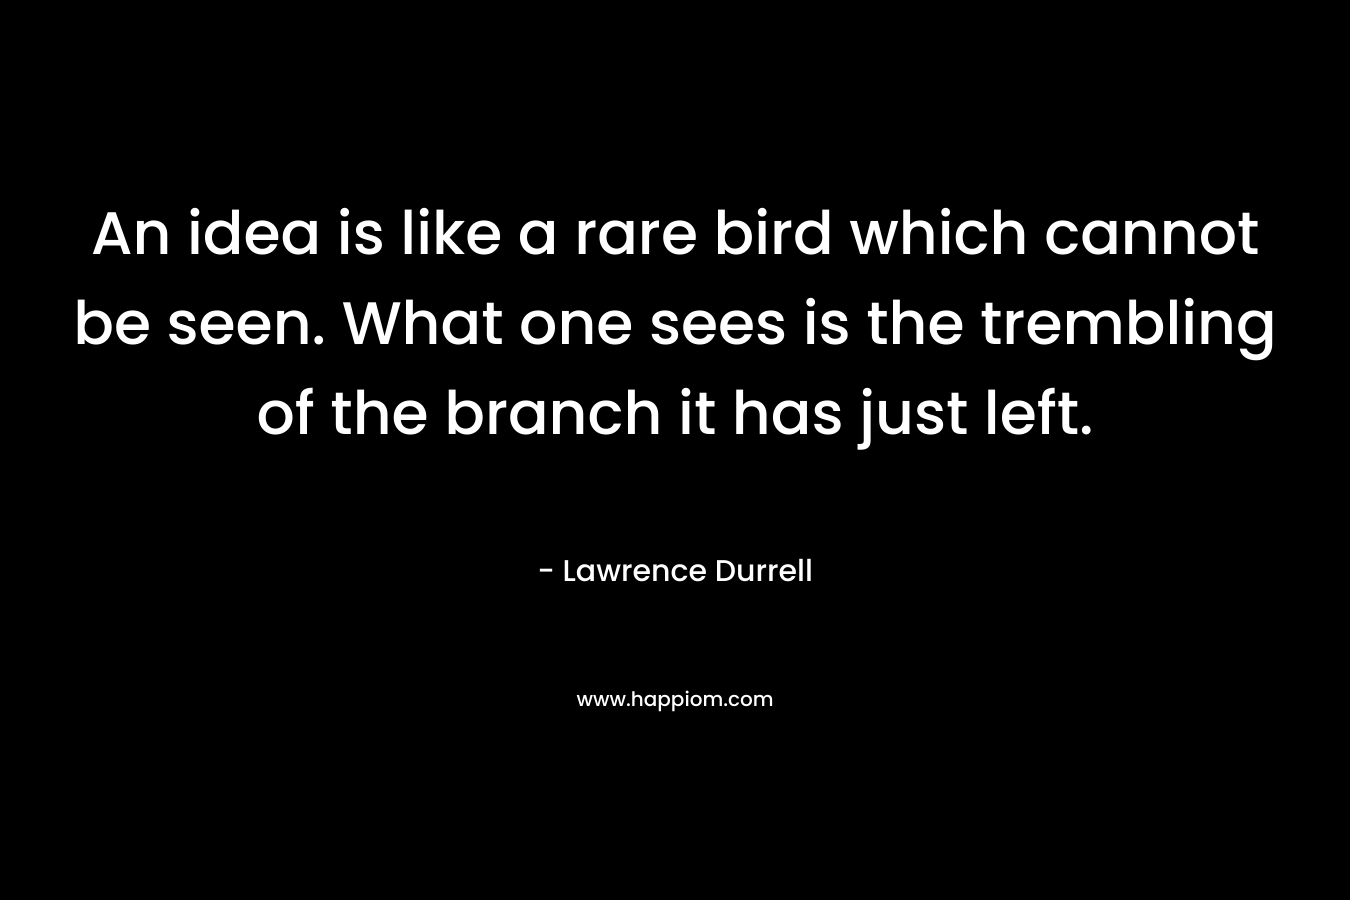 An idea is like a rare bird which cannot be seen. What one sees is the trembling of the branch it has just left. – Lawrence Durrell